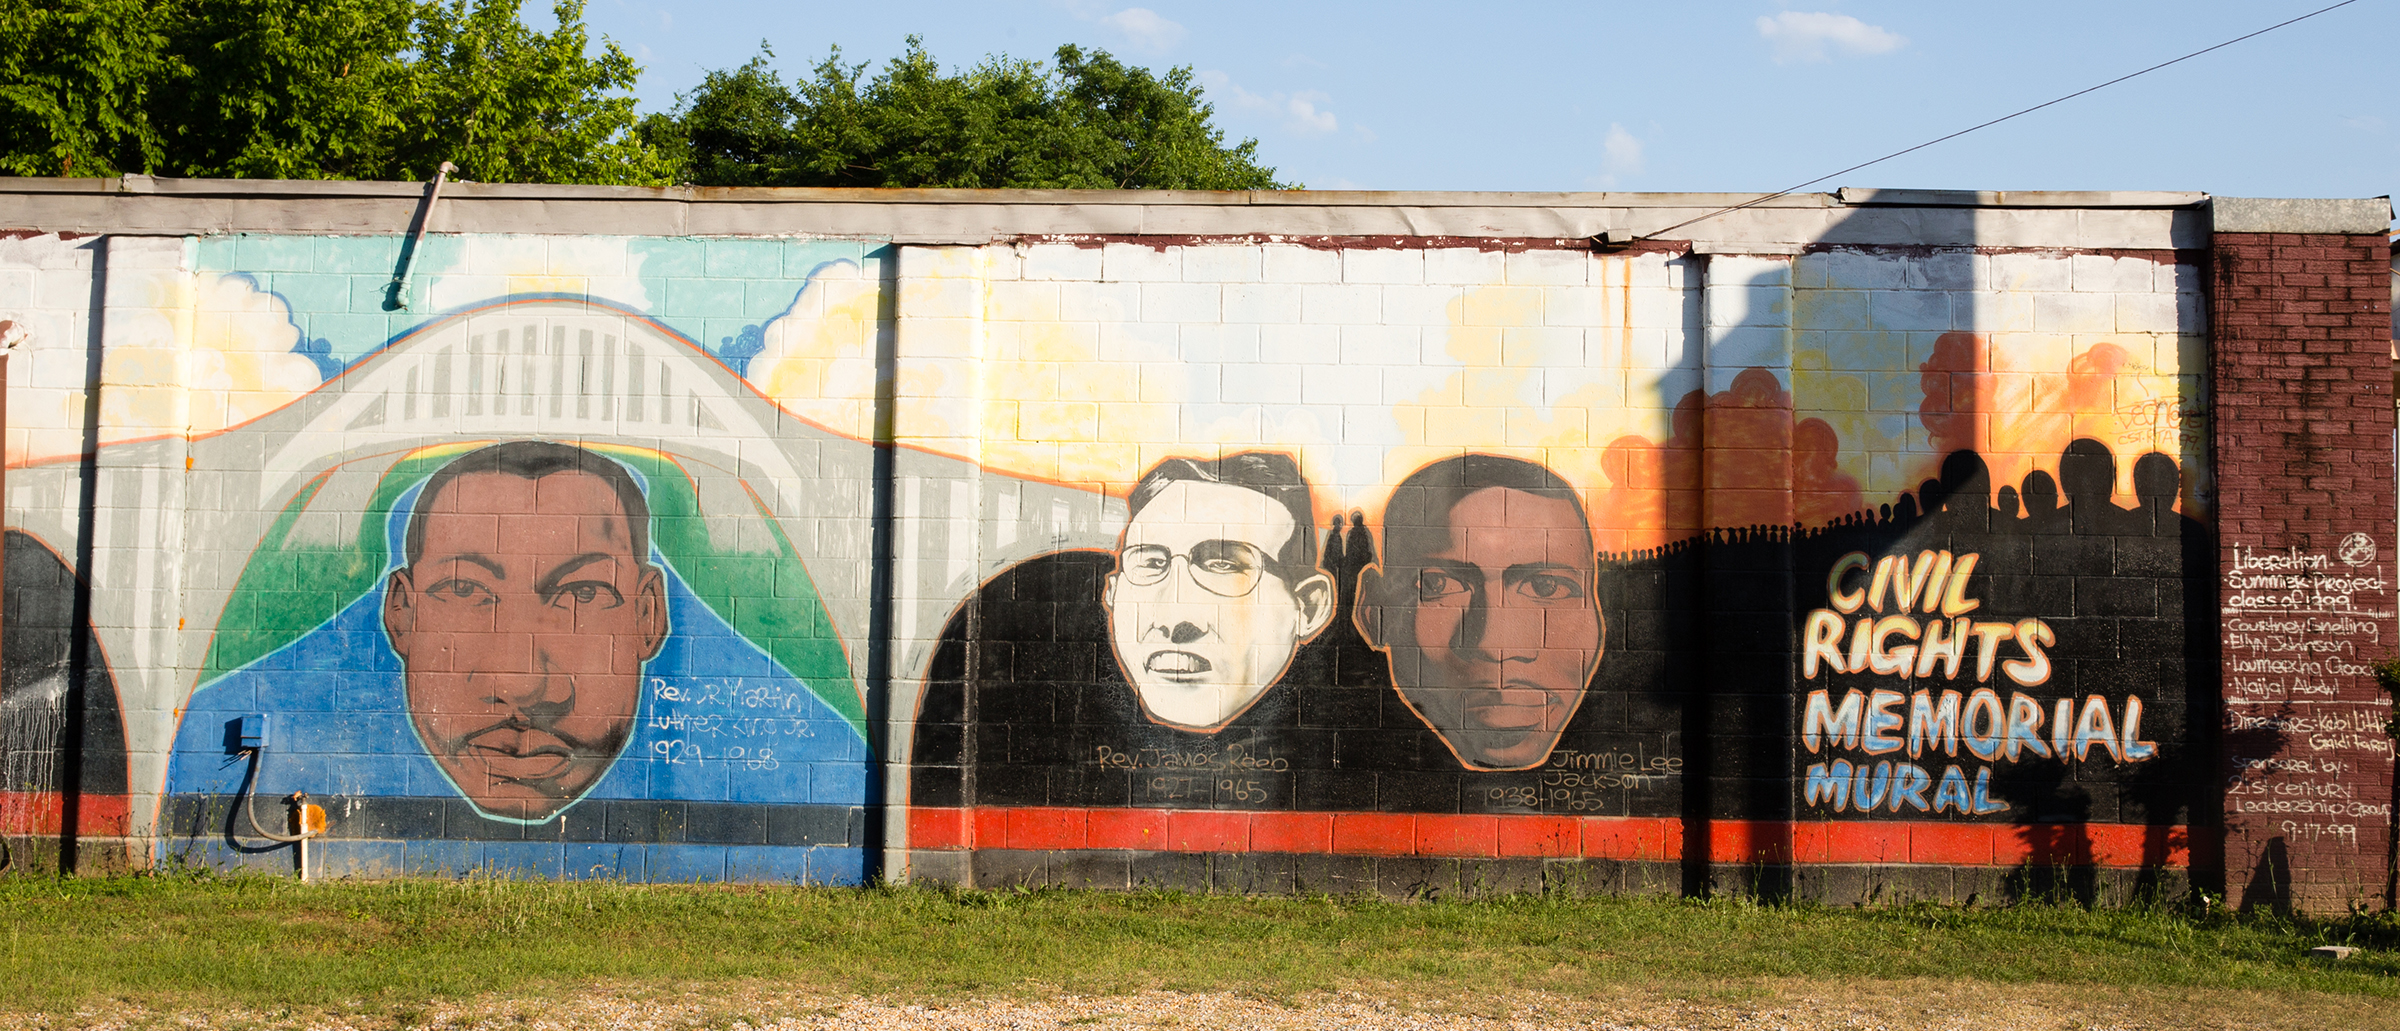 This civil rights memorial mural in Selma was one of many reflecting the area’s civil rights history.